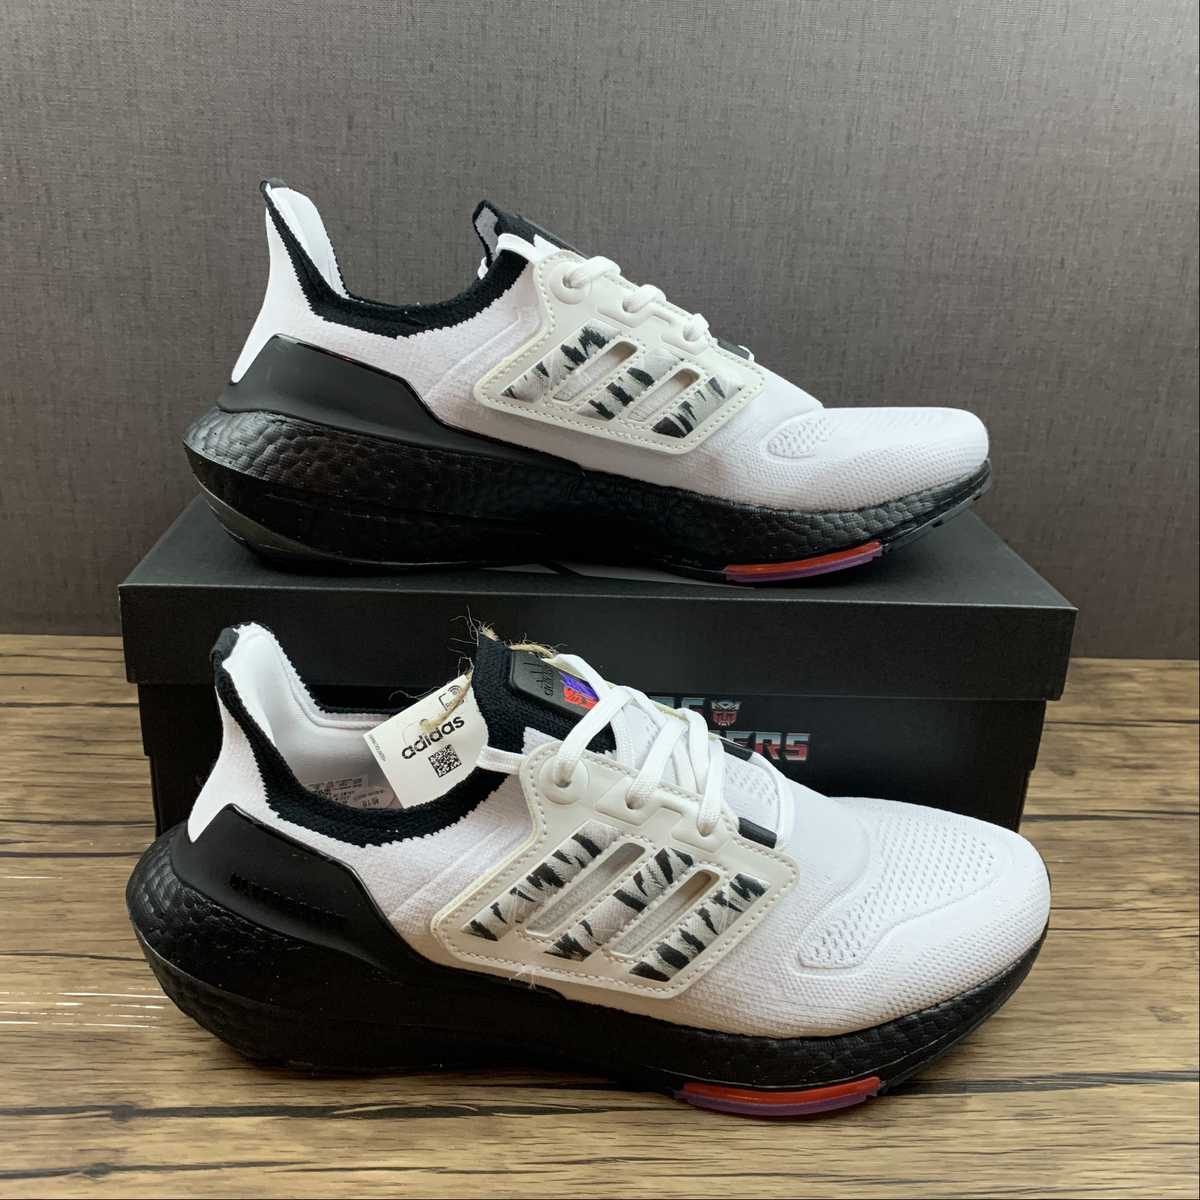 Palace x Adidas Ultra Boost 21 'White', GY5556, Cheap Arvind Air Jordans  Outlet sales online